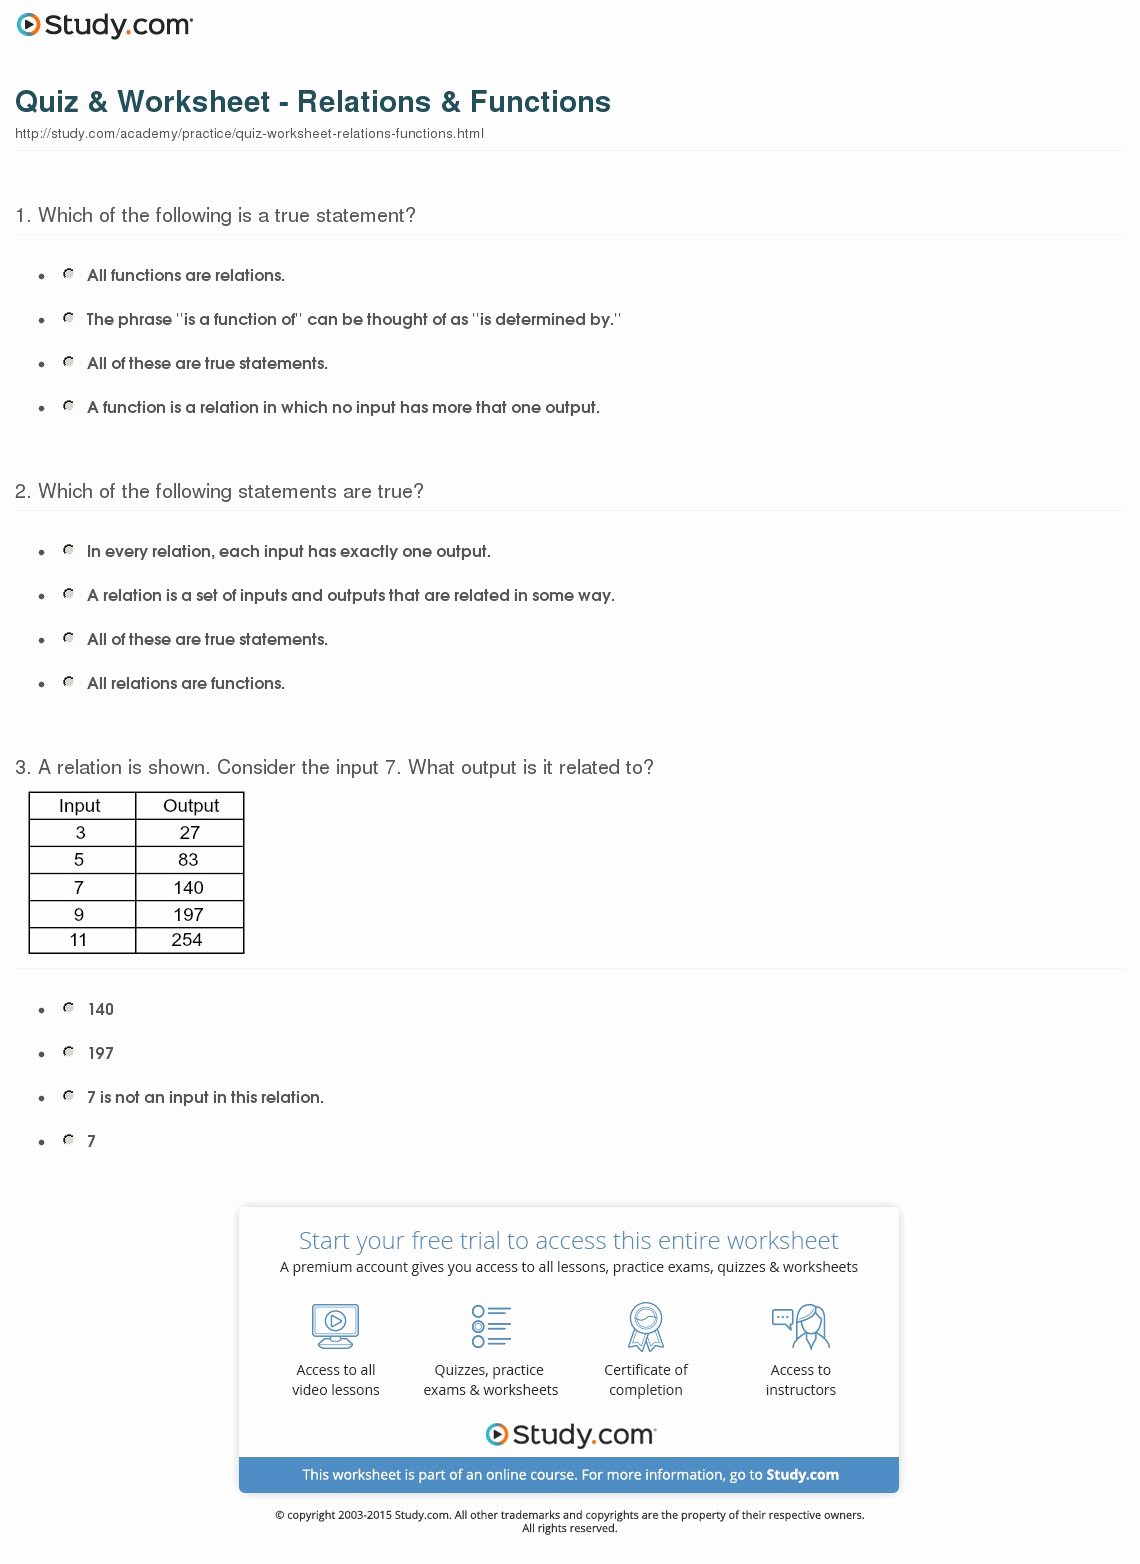 Functions and Relations Worksheet Unique Quiz &amp; Worksheet Relations &amp; Functions